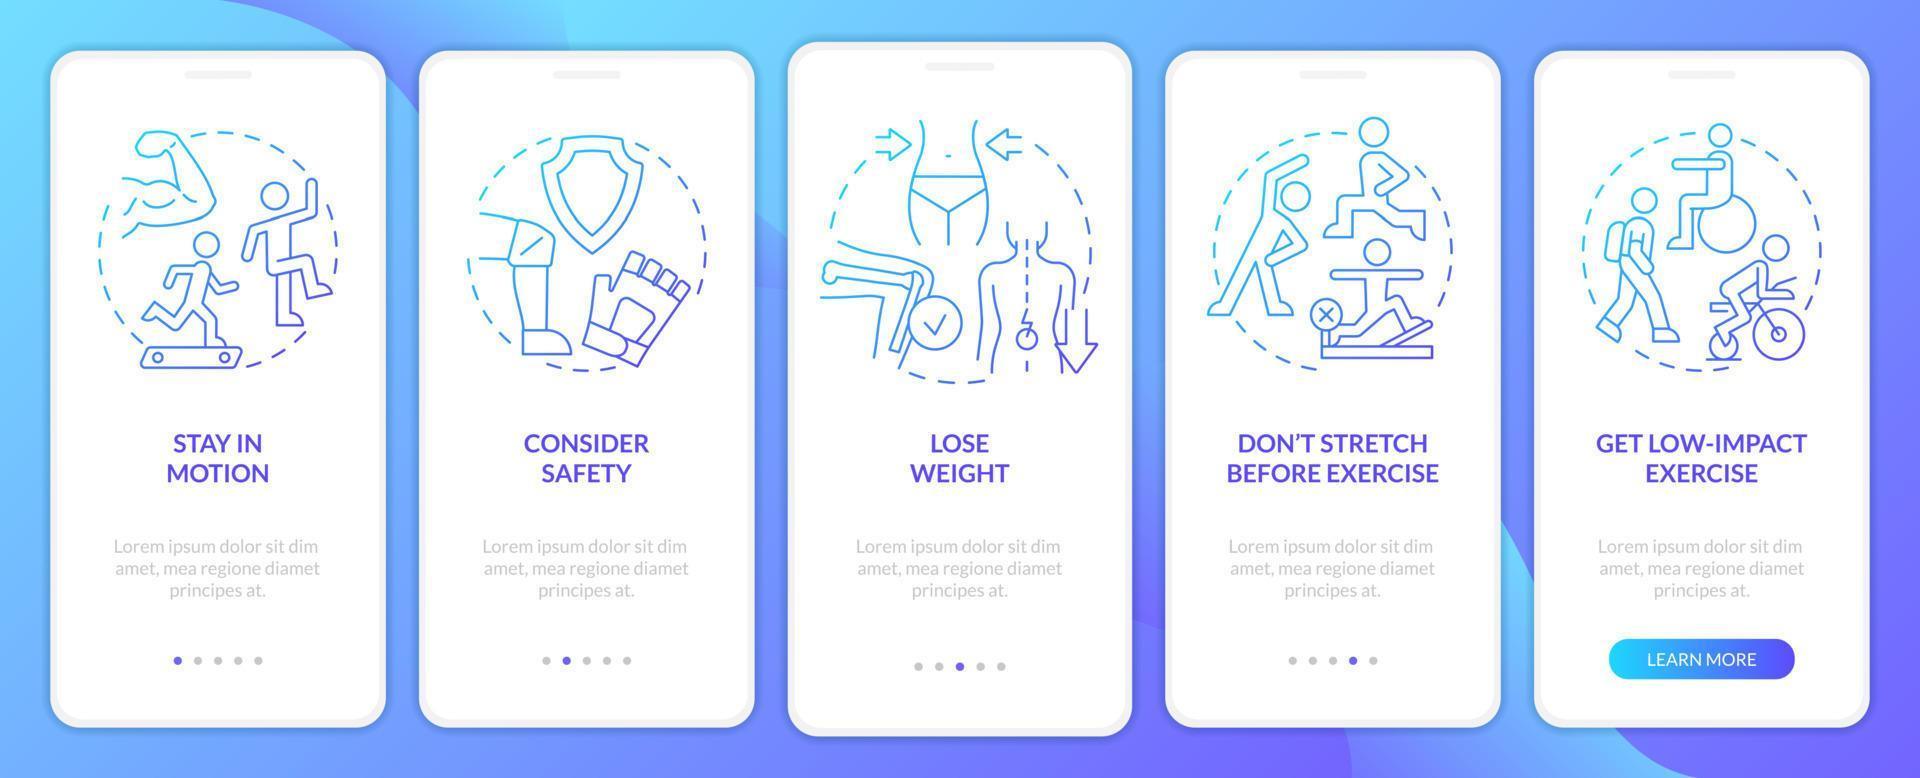 Keeping joints healthy tips blue gradient onboarding mobile app screen. Walkthrough 5 steps graphic instructions pages with linear concepts. UI, UX, GUI template. Myriad Pro-Bold, Regular fonts used vector